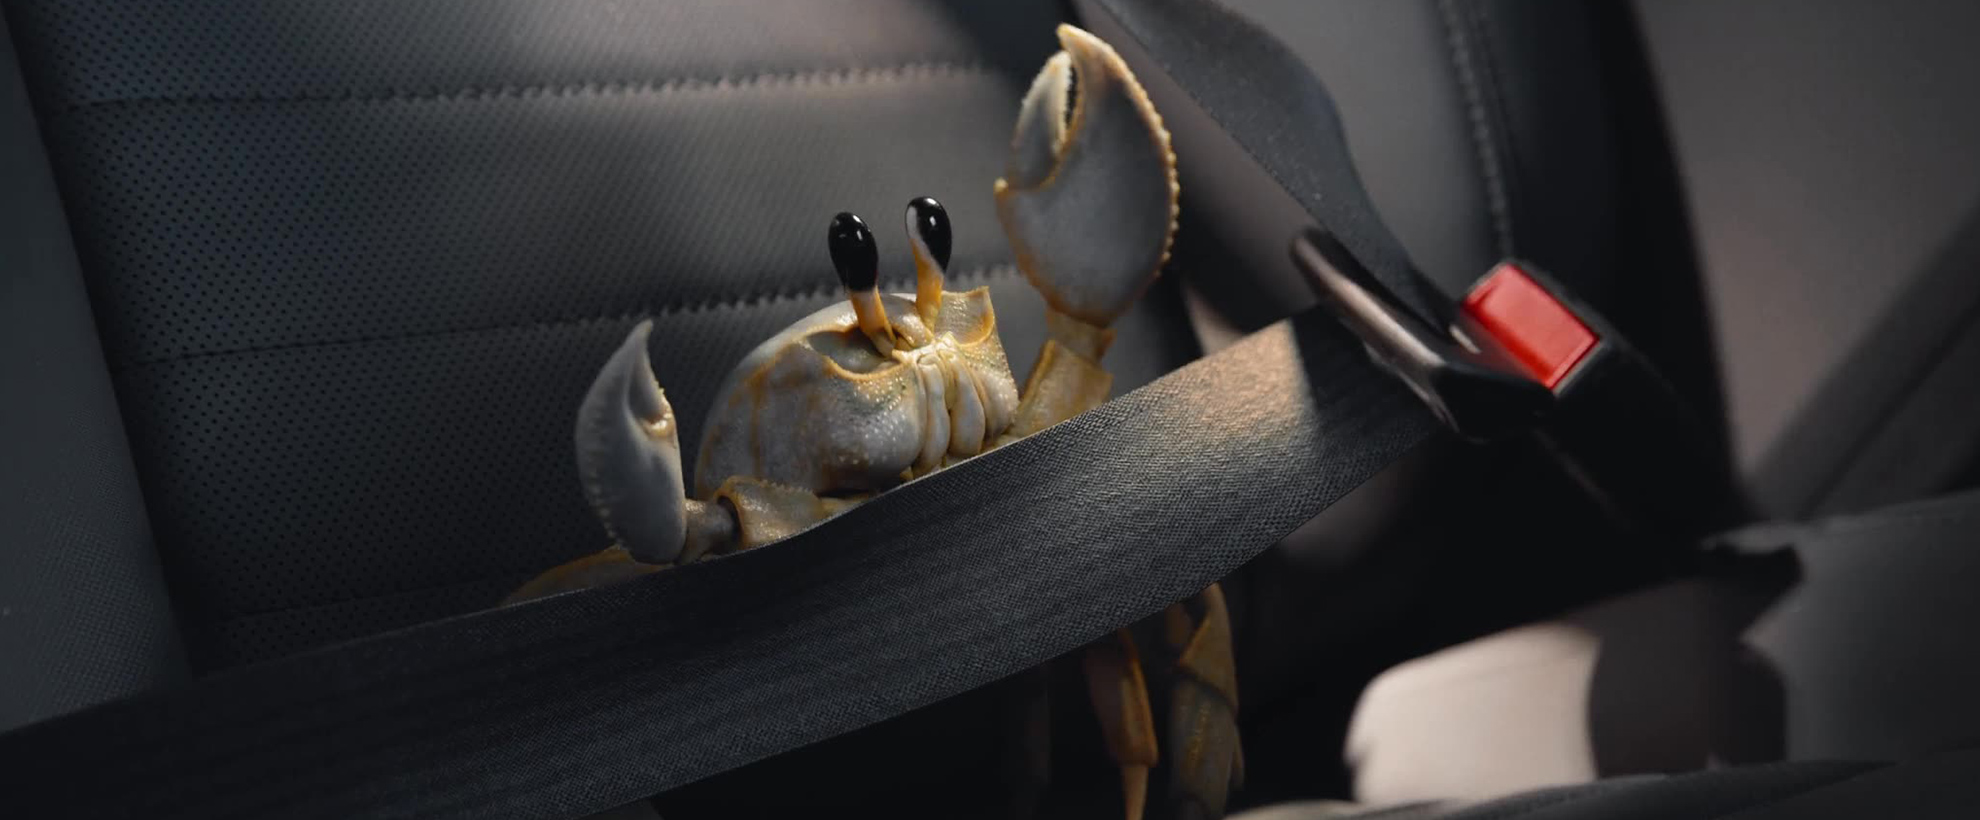 a small crab in the back seat of a car, strapped in with a seatbelt and pressed against the seat by G force as the car moves forwards.